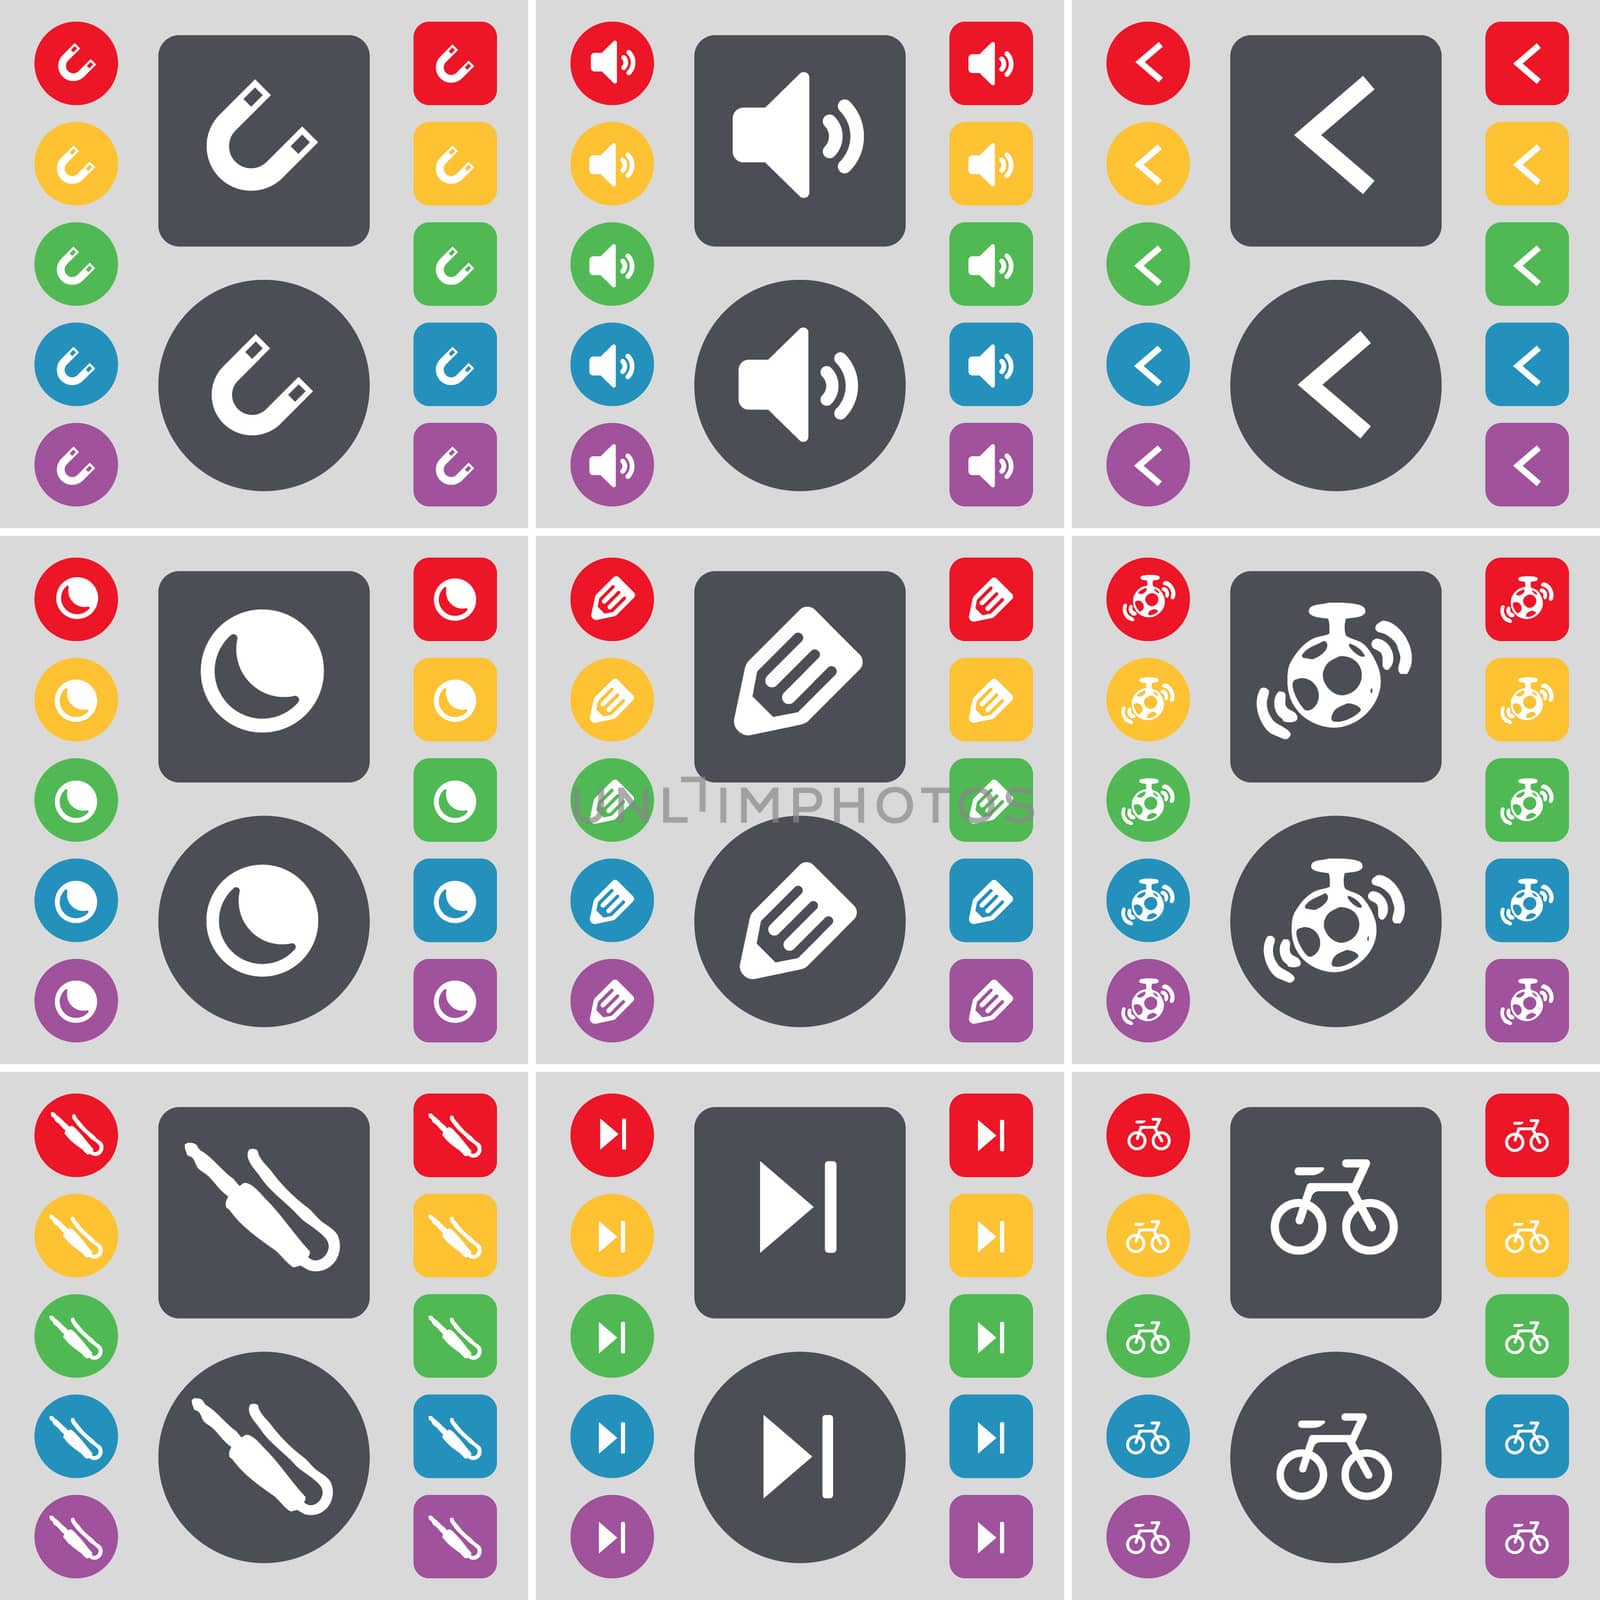 Magnet, Sound, Arrow left, Moon, Pencil, Speaker, Microphone connector, Media skip, Bicycle icon symbol. A large set of flat, colored buttons for your design. illustration